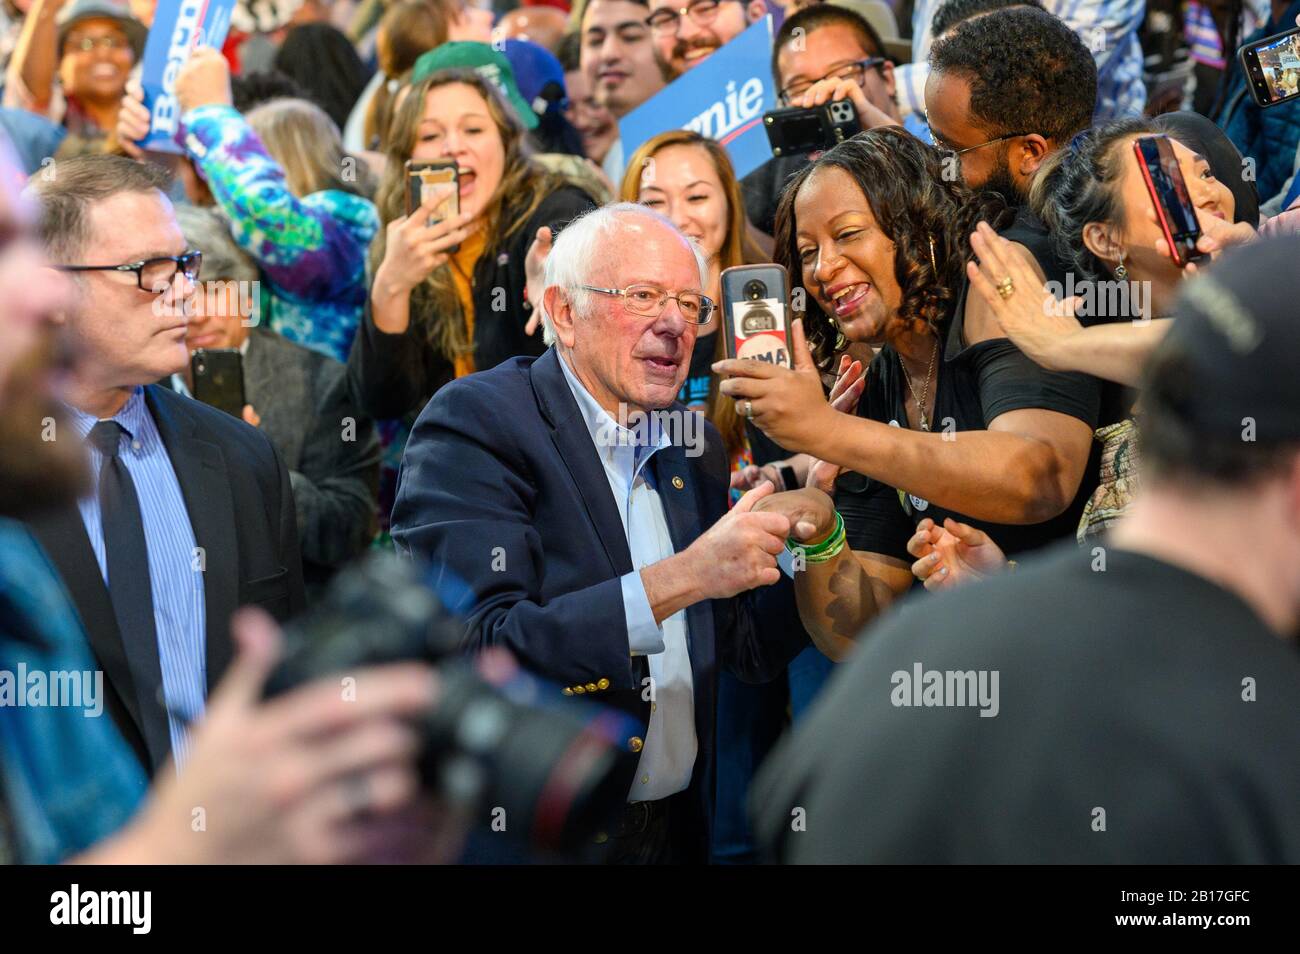 Houston, Texas - February 23, 2020: Democratic Presidential candidate Senator Bernie Sanders stops to take a selfie with a supporter after his rally c Stock Photo